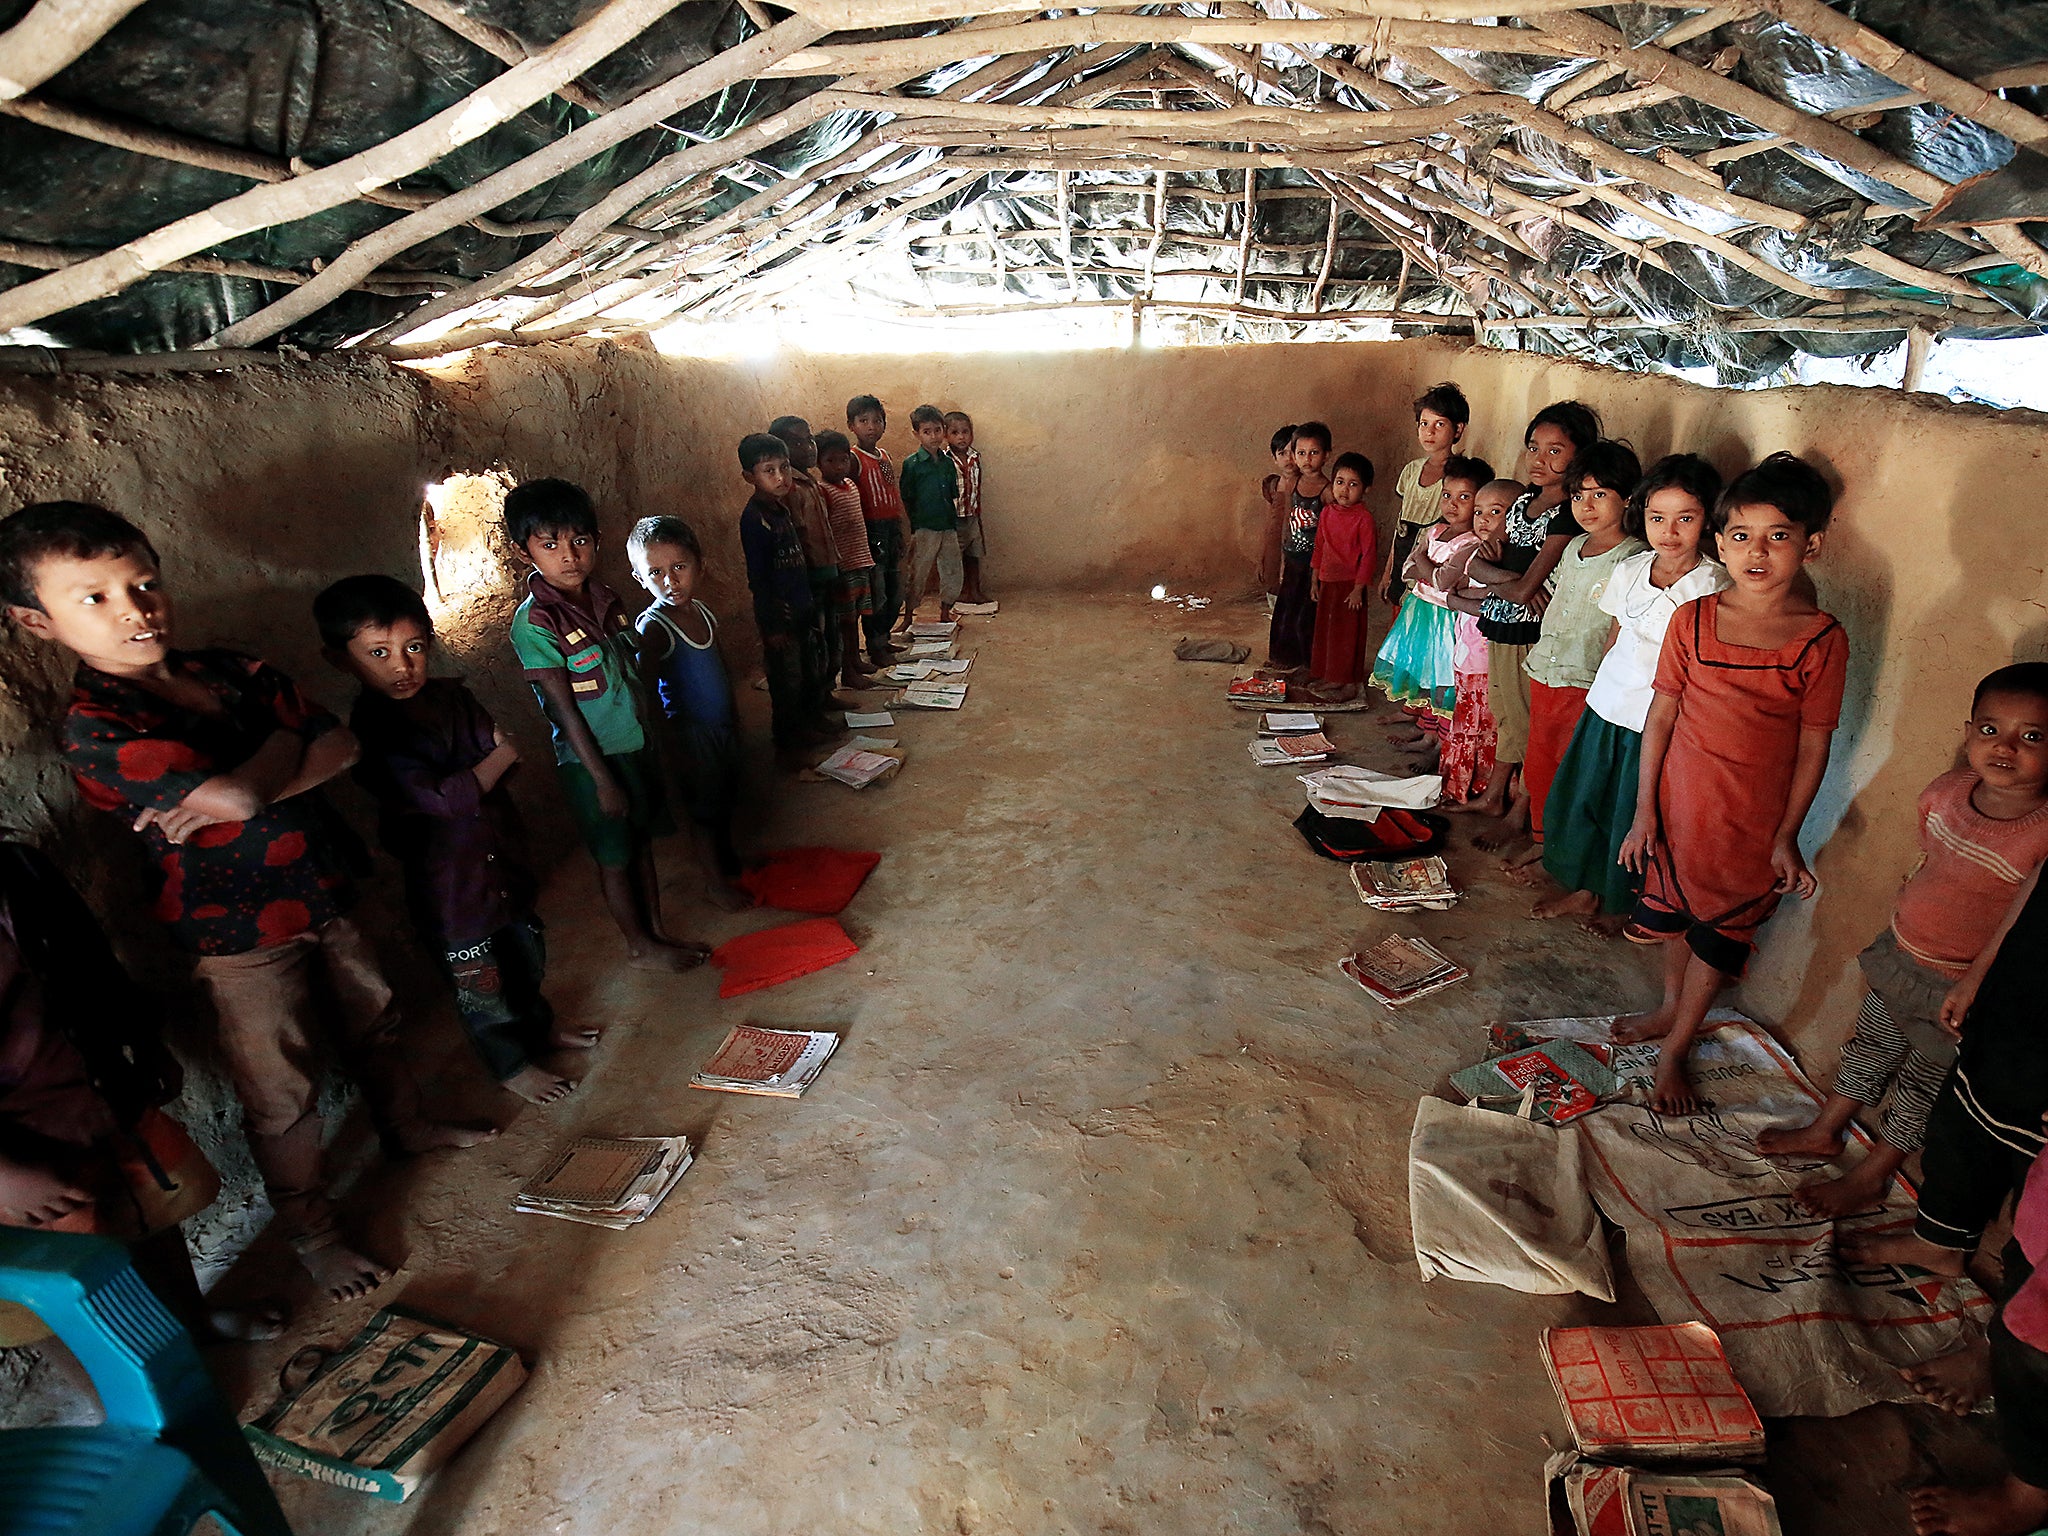 Rohingya children react to the camera as they attend a class at a school inside the Kutupalang Refugee Camp in Cox’s Bazar, Bangladesh